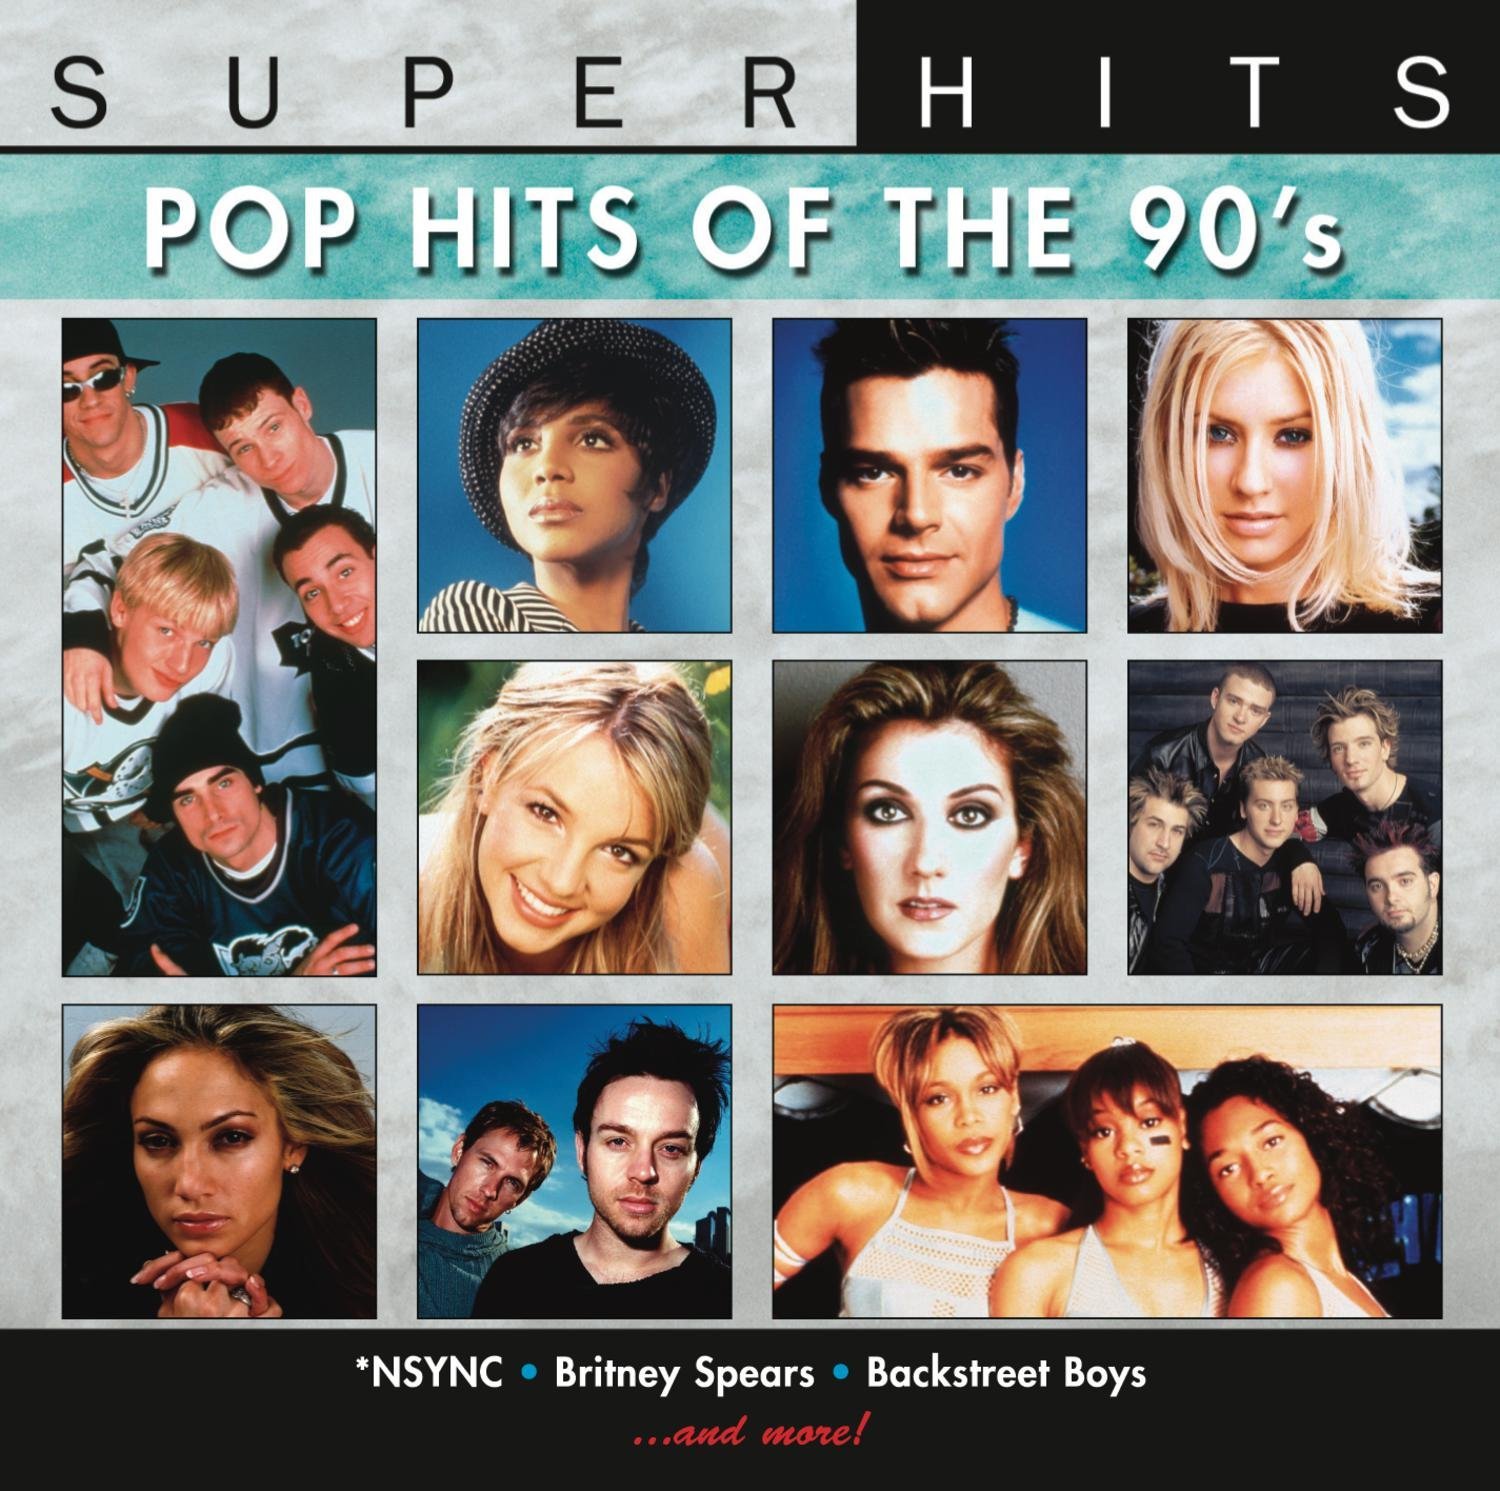 Super Hits Pop Hits of the 90's